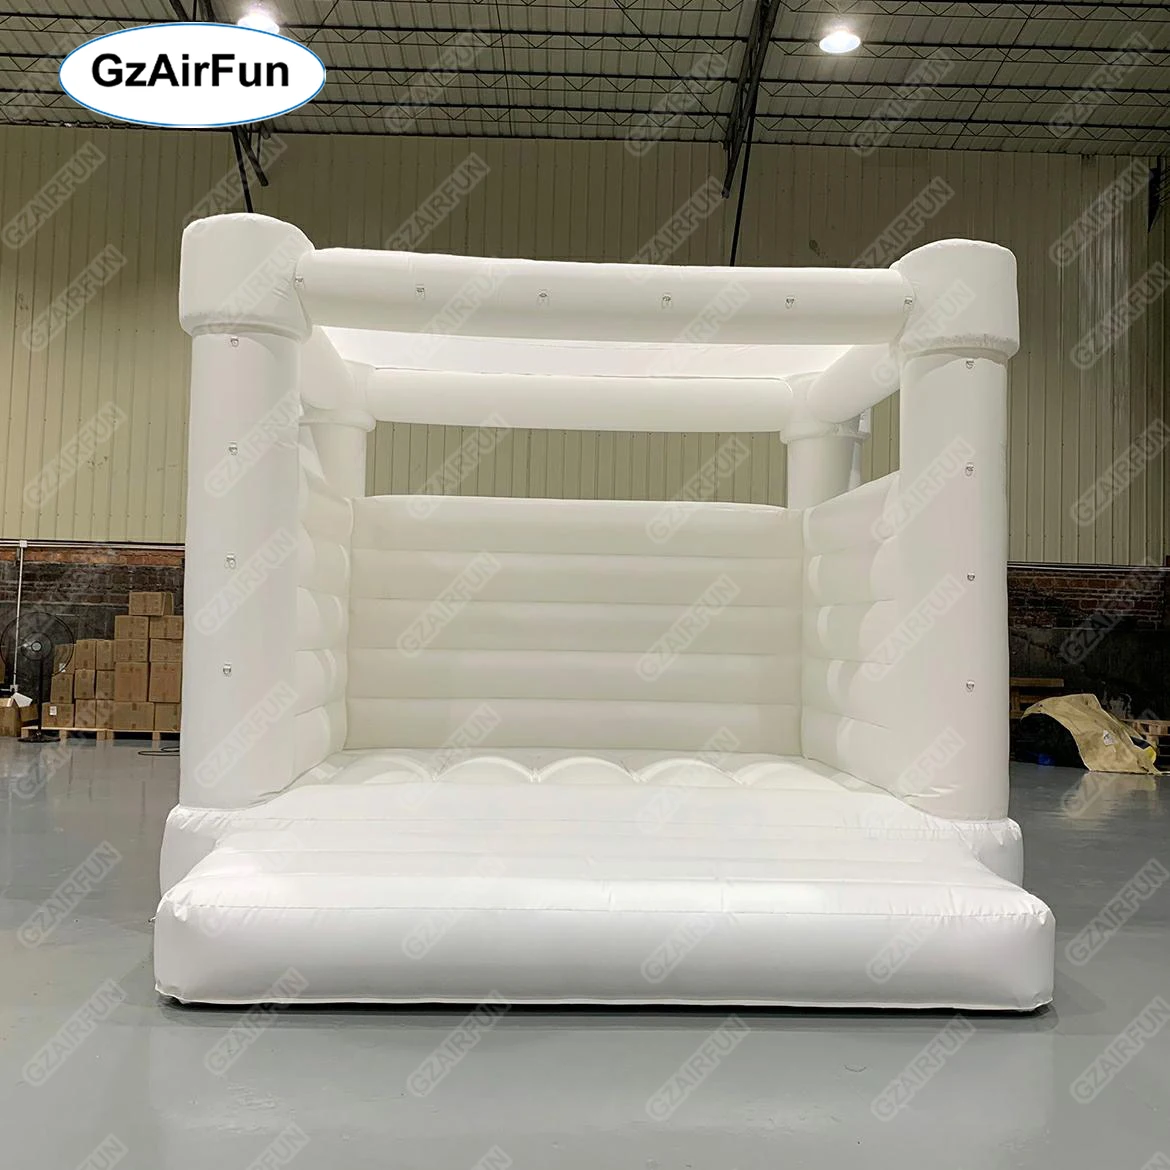 

Commercial Large Adult Wedding Bounce House Jumping Bouncy Castle Jumper Wedding White Inflatable Bounce House For Party